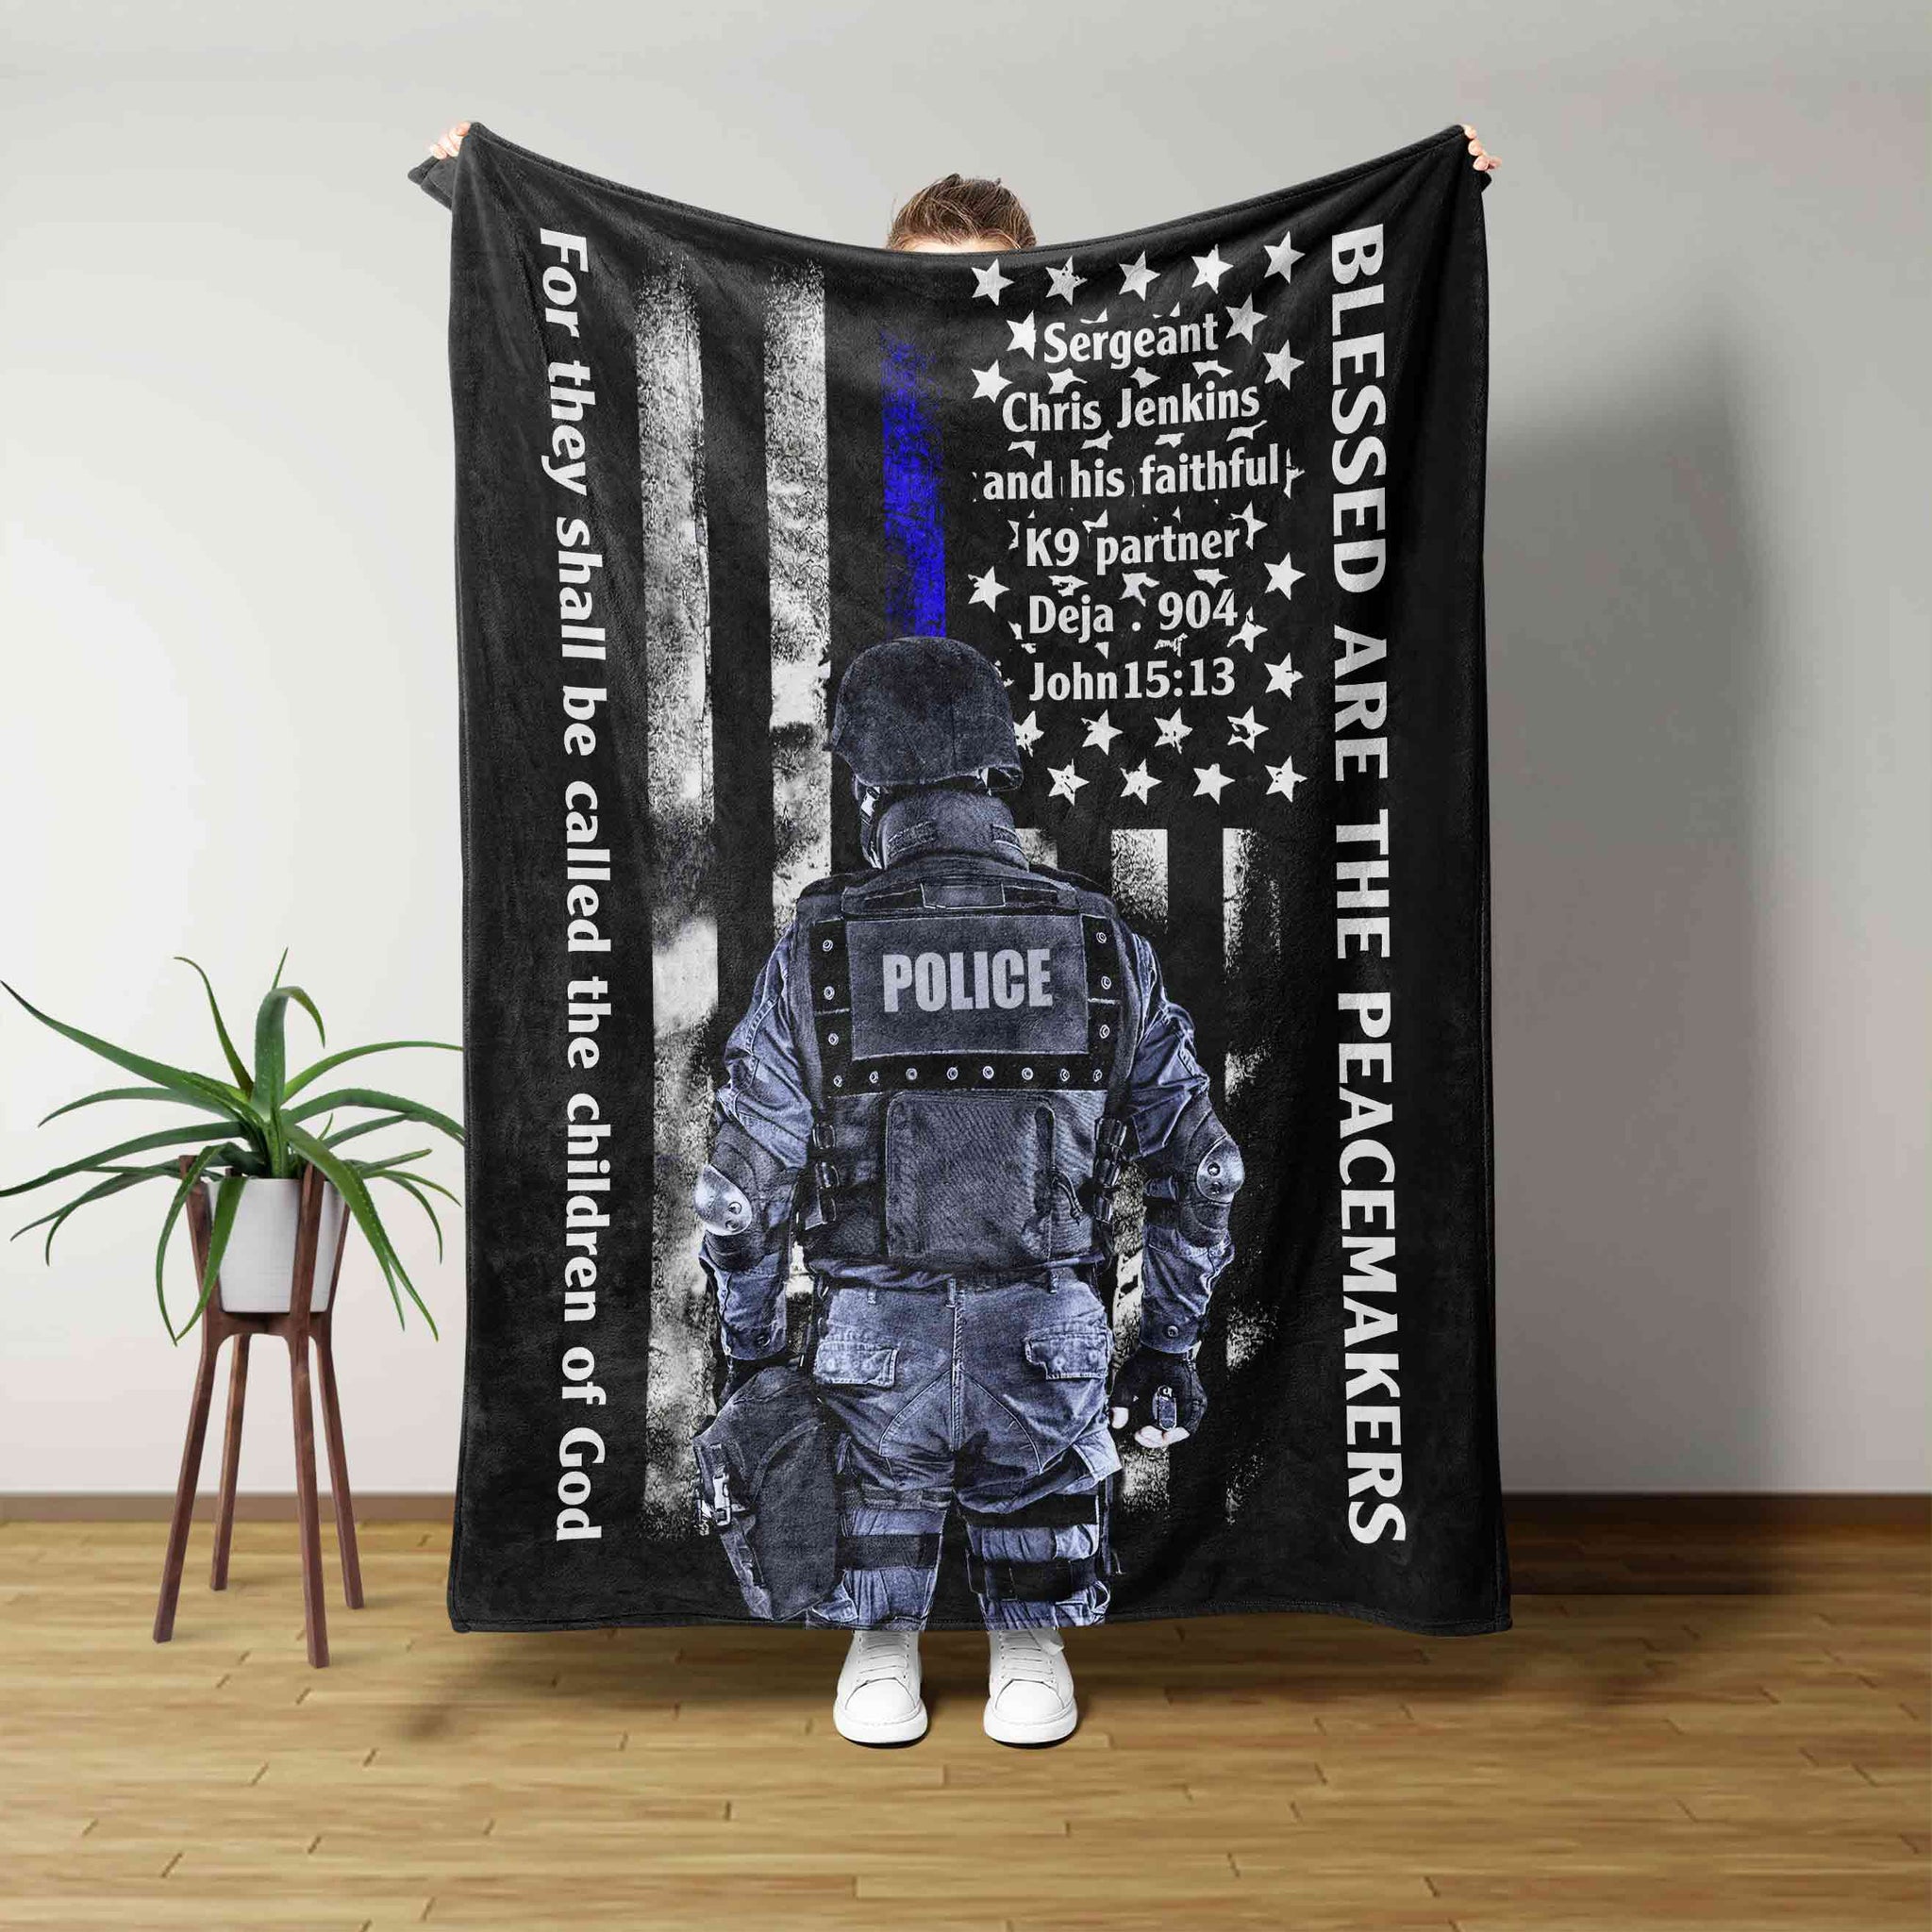 Personalized Name Blanket, Blessed Are The Peacemakers Blanket, Police Blanket, American Flag Blanket, Gift Blanket